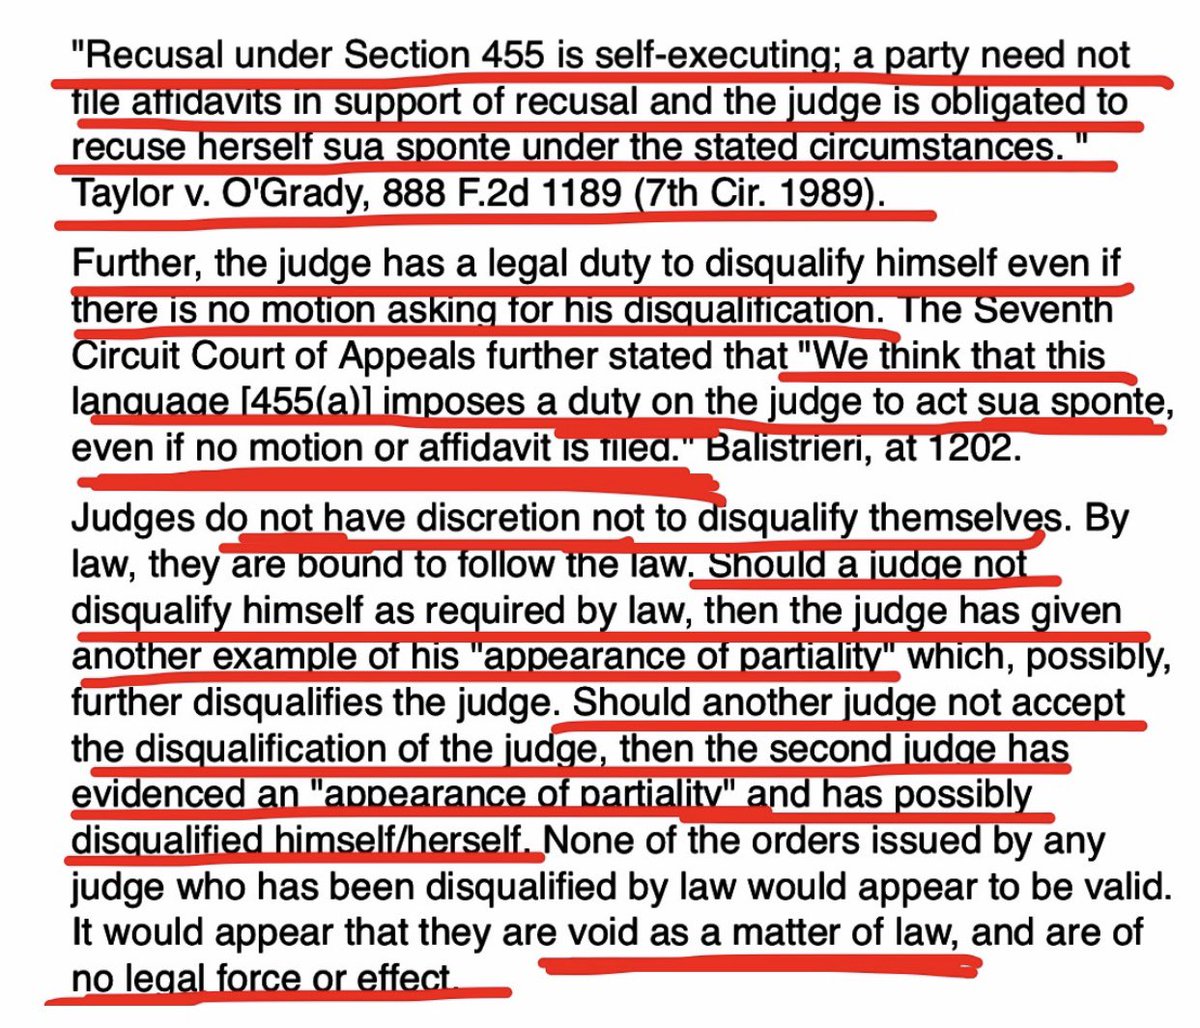 Mandatory Judicial sua sponte RECUSAL Sec. 455 “self-executing” means a ltitigant/party to a legal action does NOT even have to file/submit/make a motion for JUDGE’s recusal #JudicialDisqualification #UnethicalDoraIrizarry